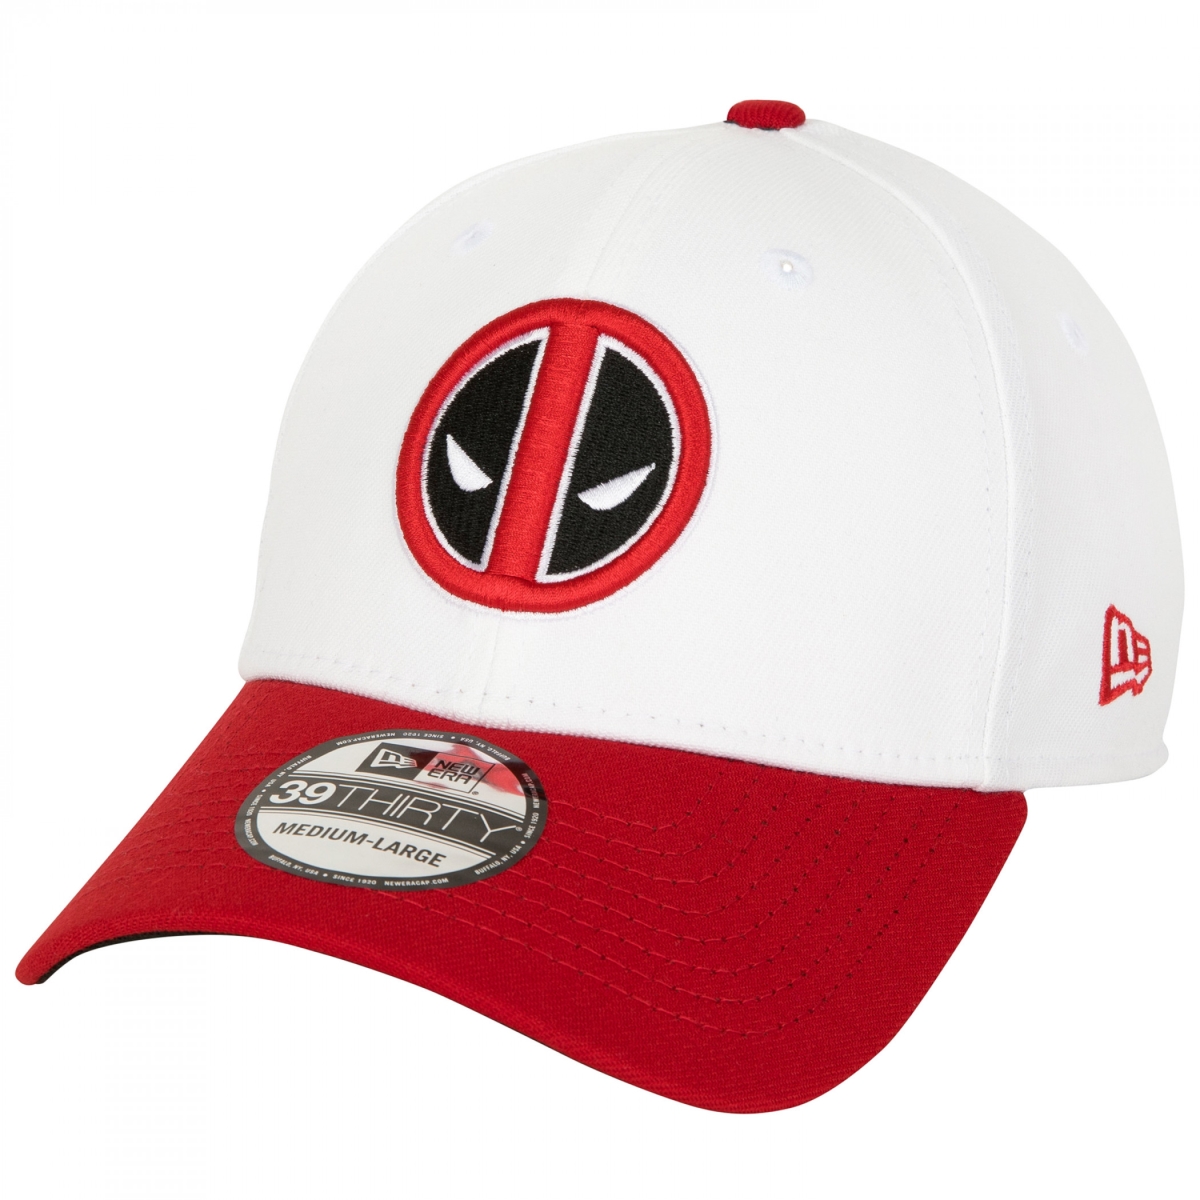 Picture of Deadpool 868122-medium-la Deadpool Logo Home Colors   Era 39Thirty Fitted Hat&#44; White & Red - Medium & Large